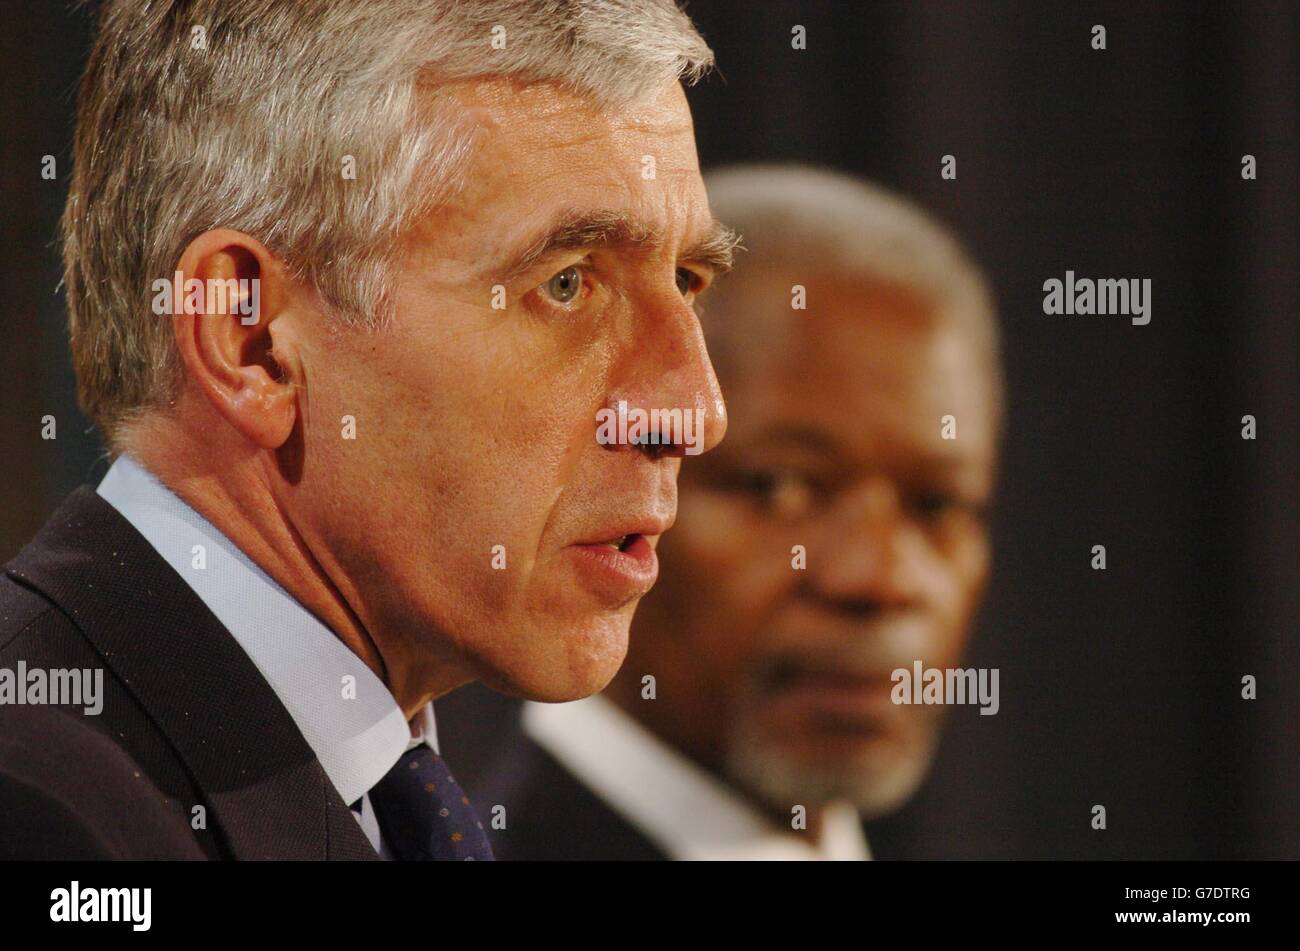 United Nations Secretary General Kofi Annan (right) and British Foreign Secretary Jack Straw, during a press conference at the Foreign & Commonwealth Office in central London. Mr Annan was joined by Mr Straw as the pair discussed the ongoing situatiuon in Iraq, as well as issues regarding the Middle East peace process. Stock Photo